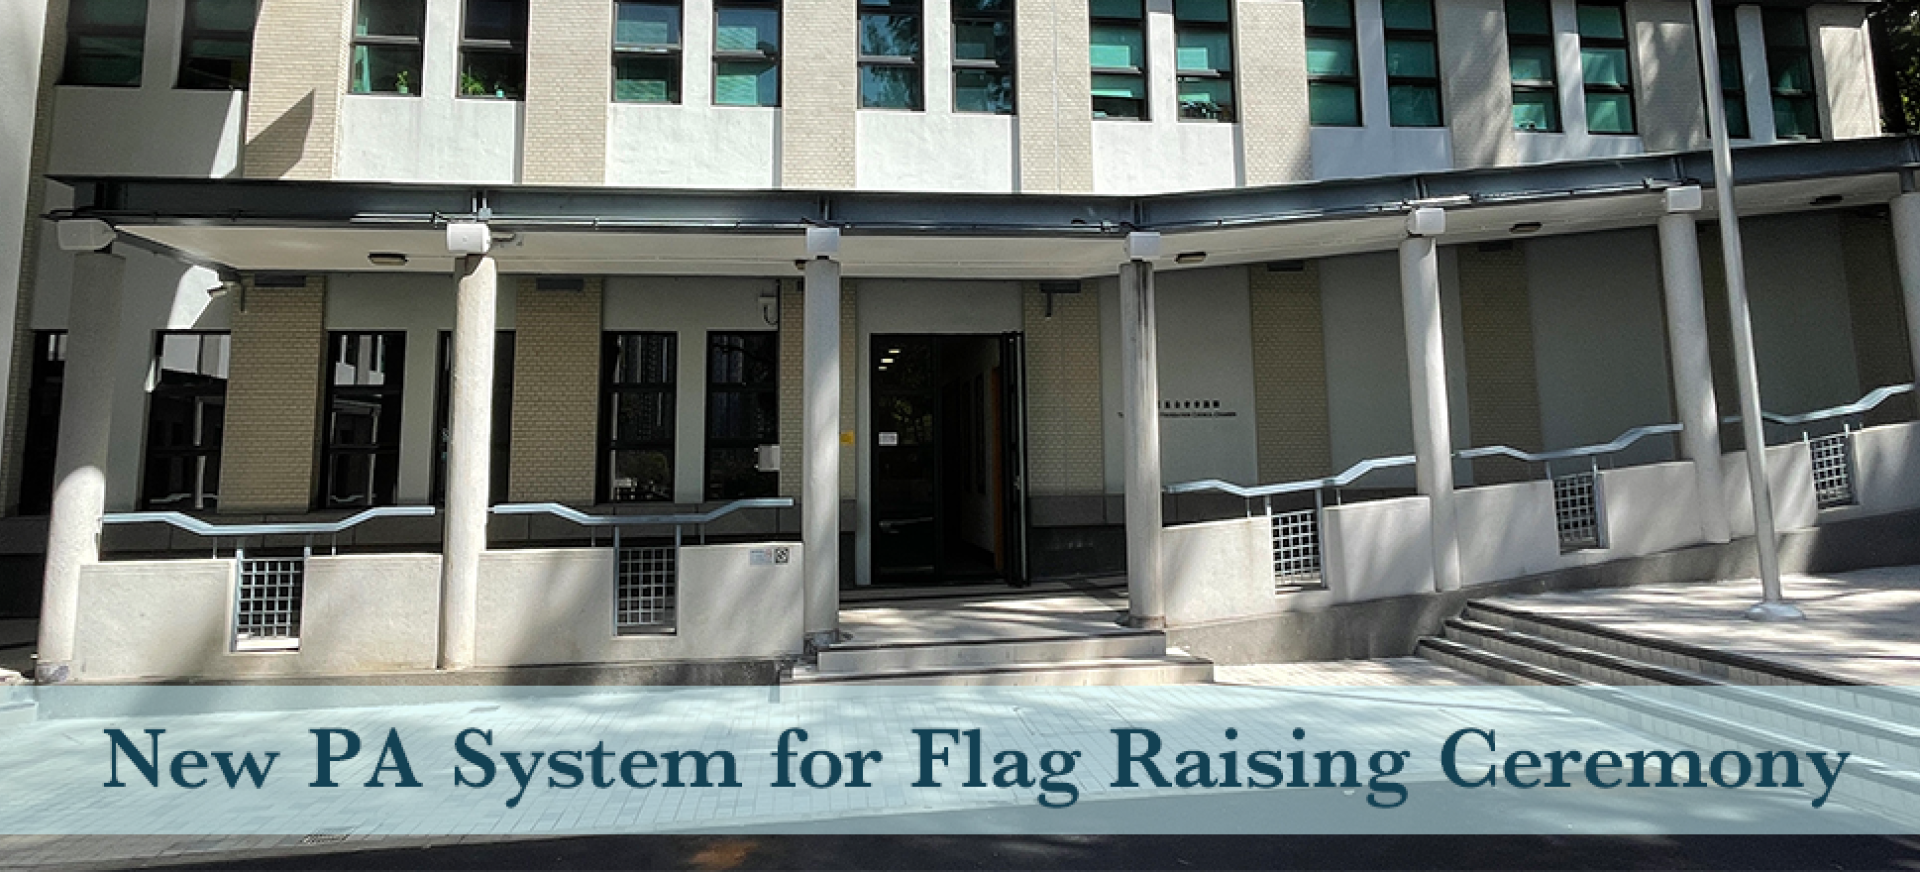 Issue 13 - New PA System for Flag Raising Ceremony